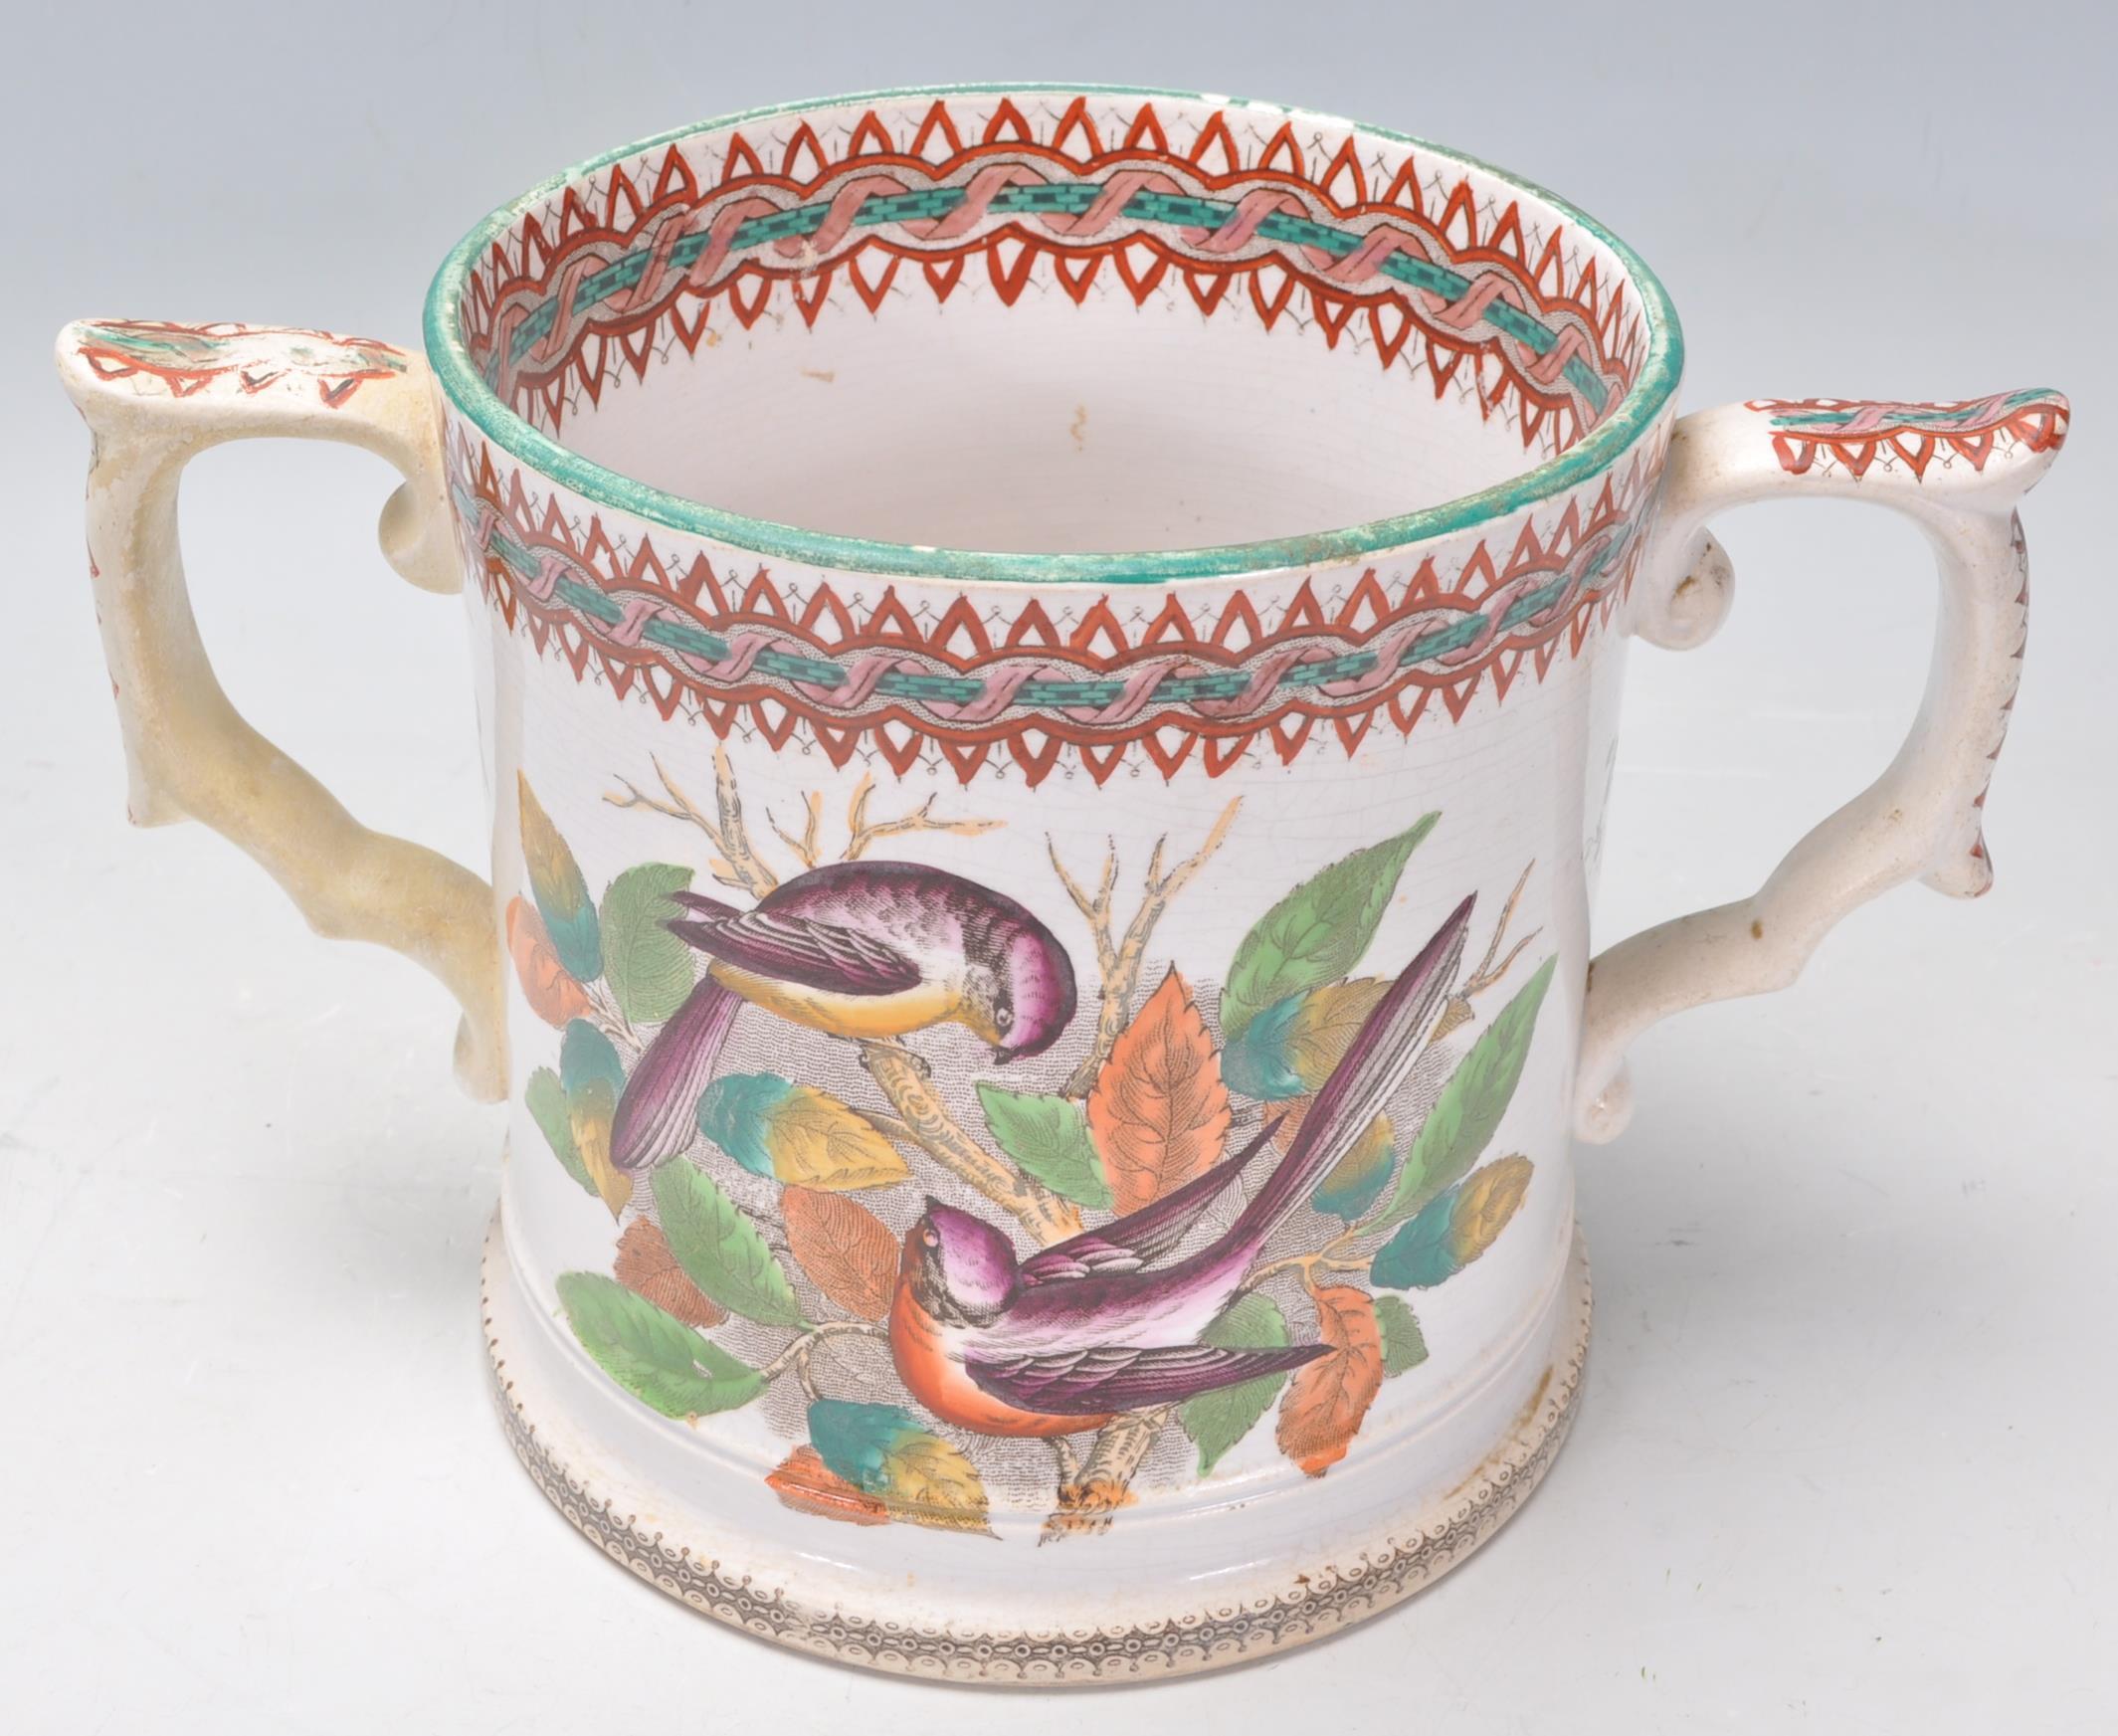 A 19th century Victorian Staffordshire twin handled marriage loving cup - mug being cream glazed - Image 5 of 7